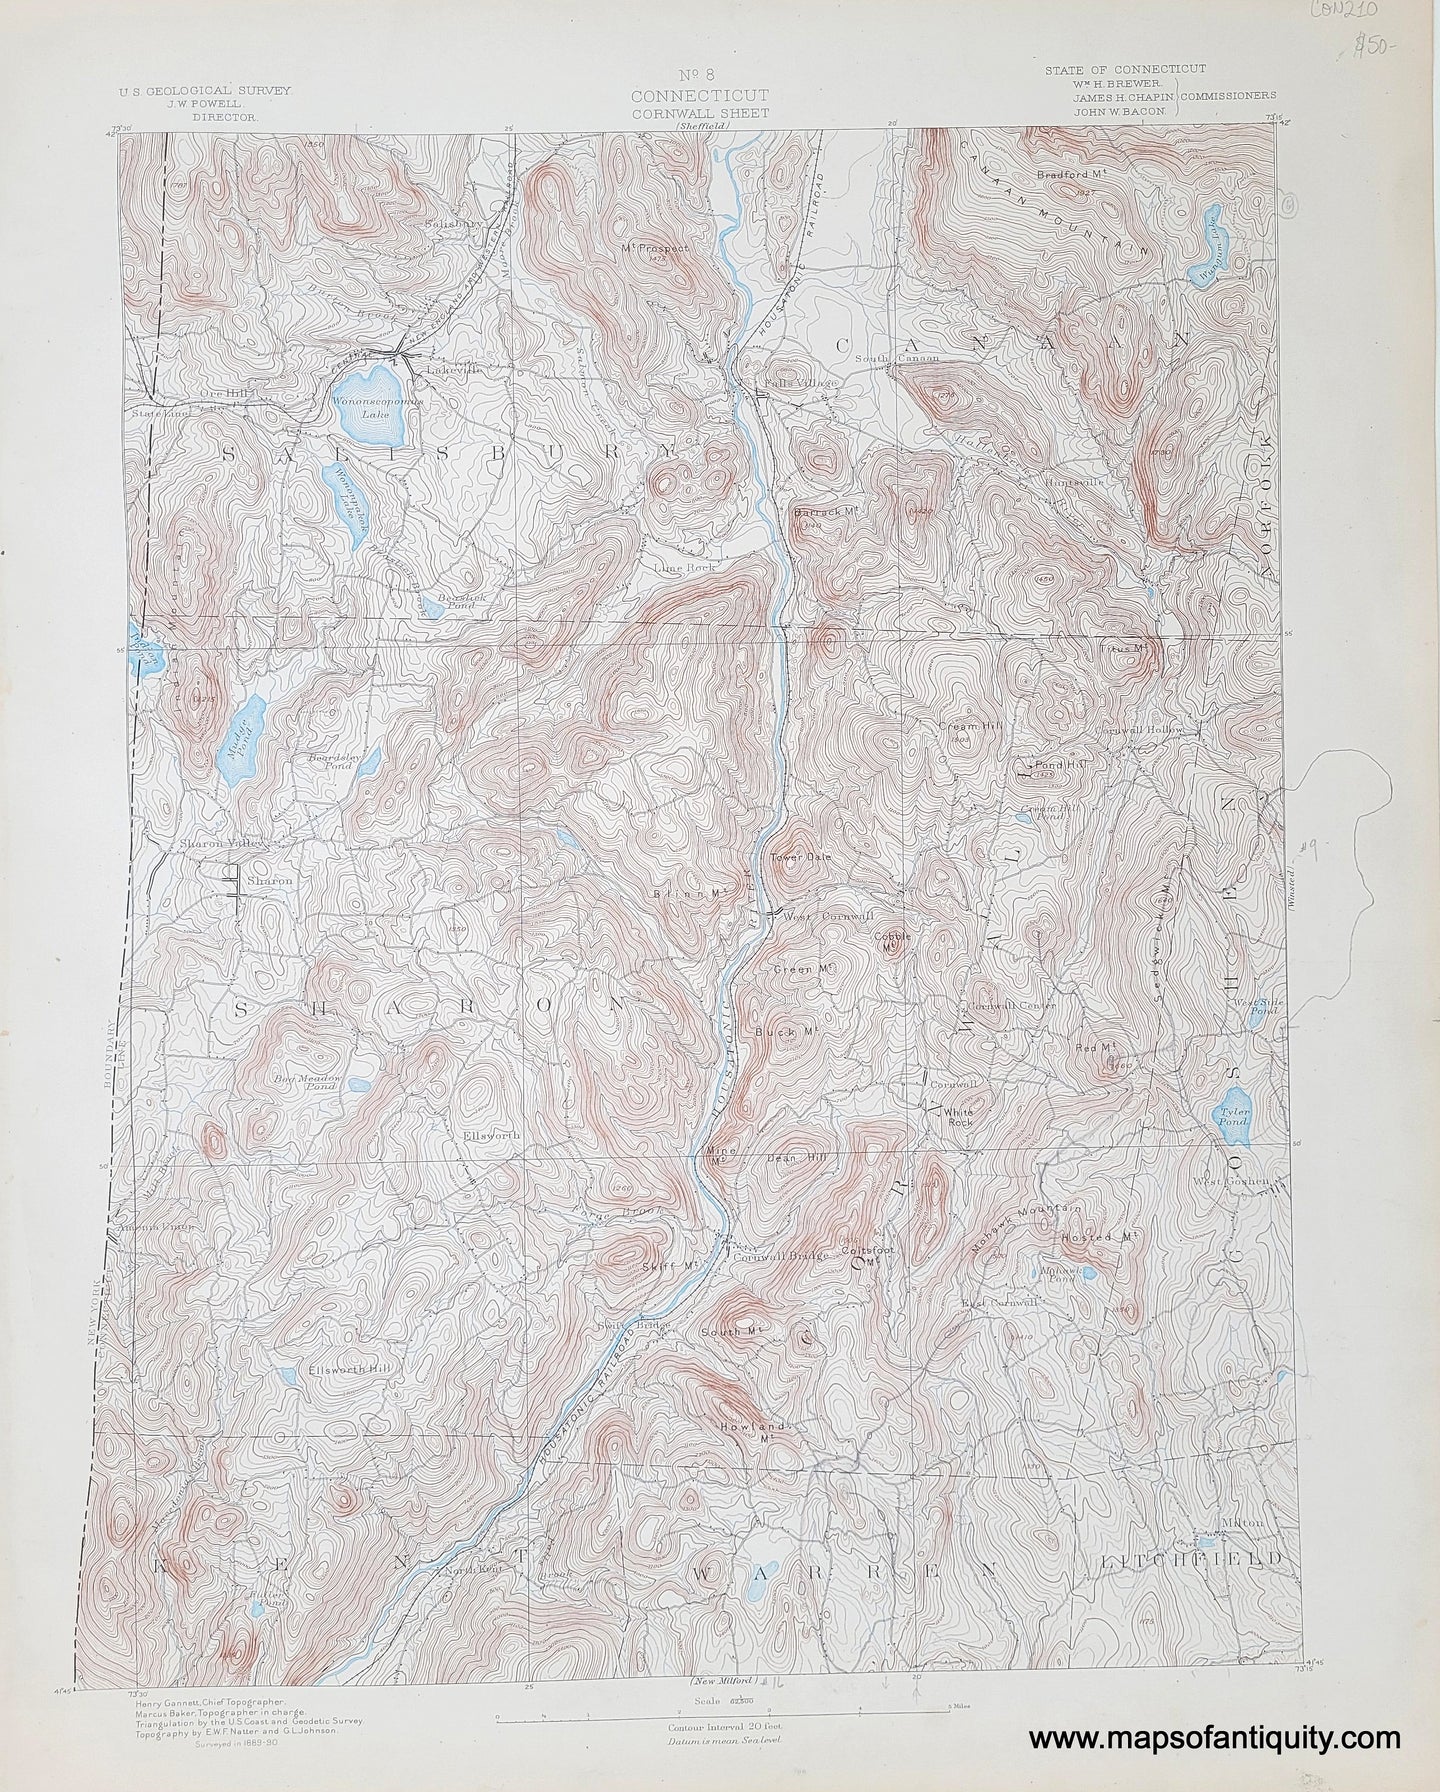 Antique-Topographical-Map-CT-Cornwall-sheet-antique-topo-map-United-States-Connecticut-1890-USGS-Maps-Of-Antiquity